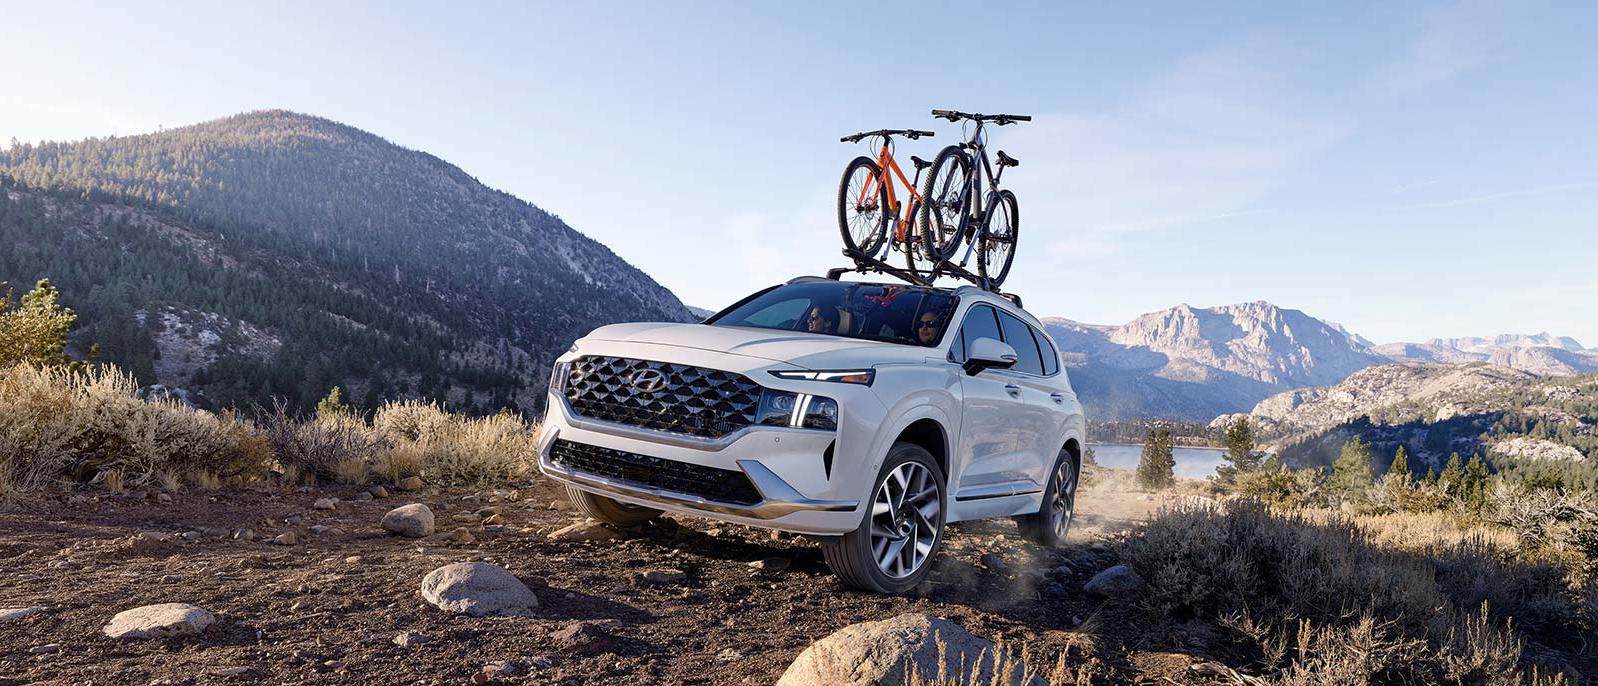 2022 Hyundai Santa Fe with mountain landscape in the background.